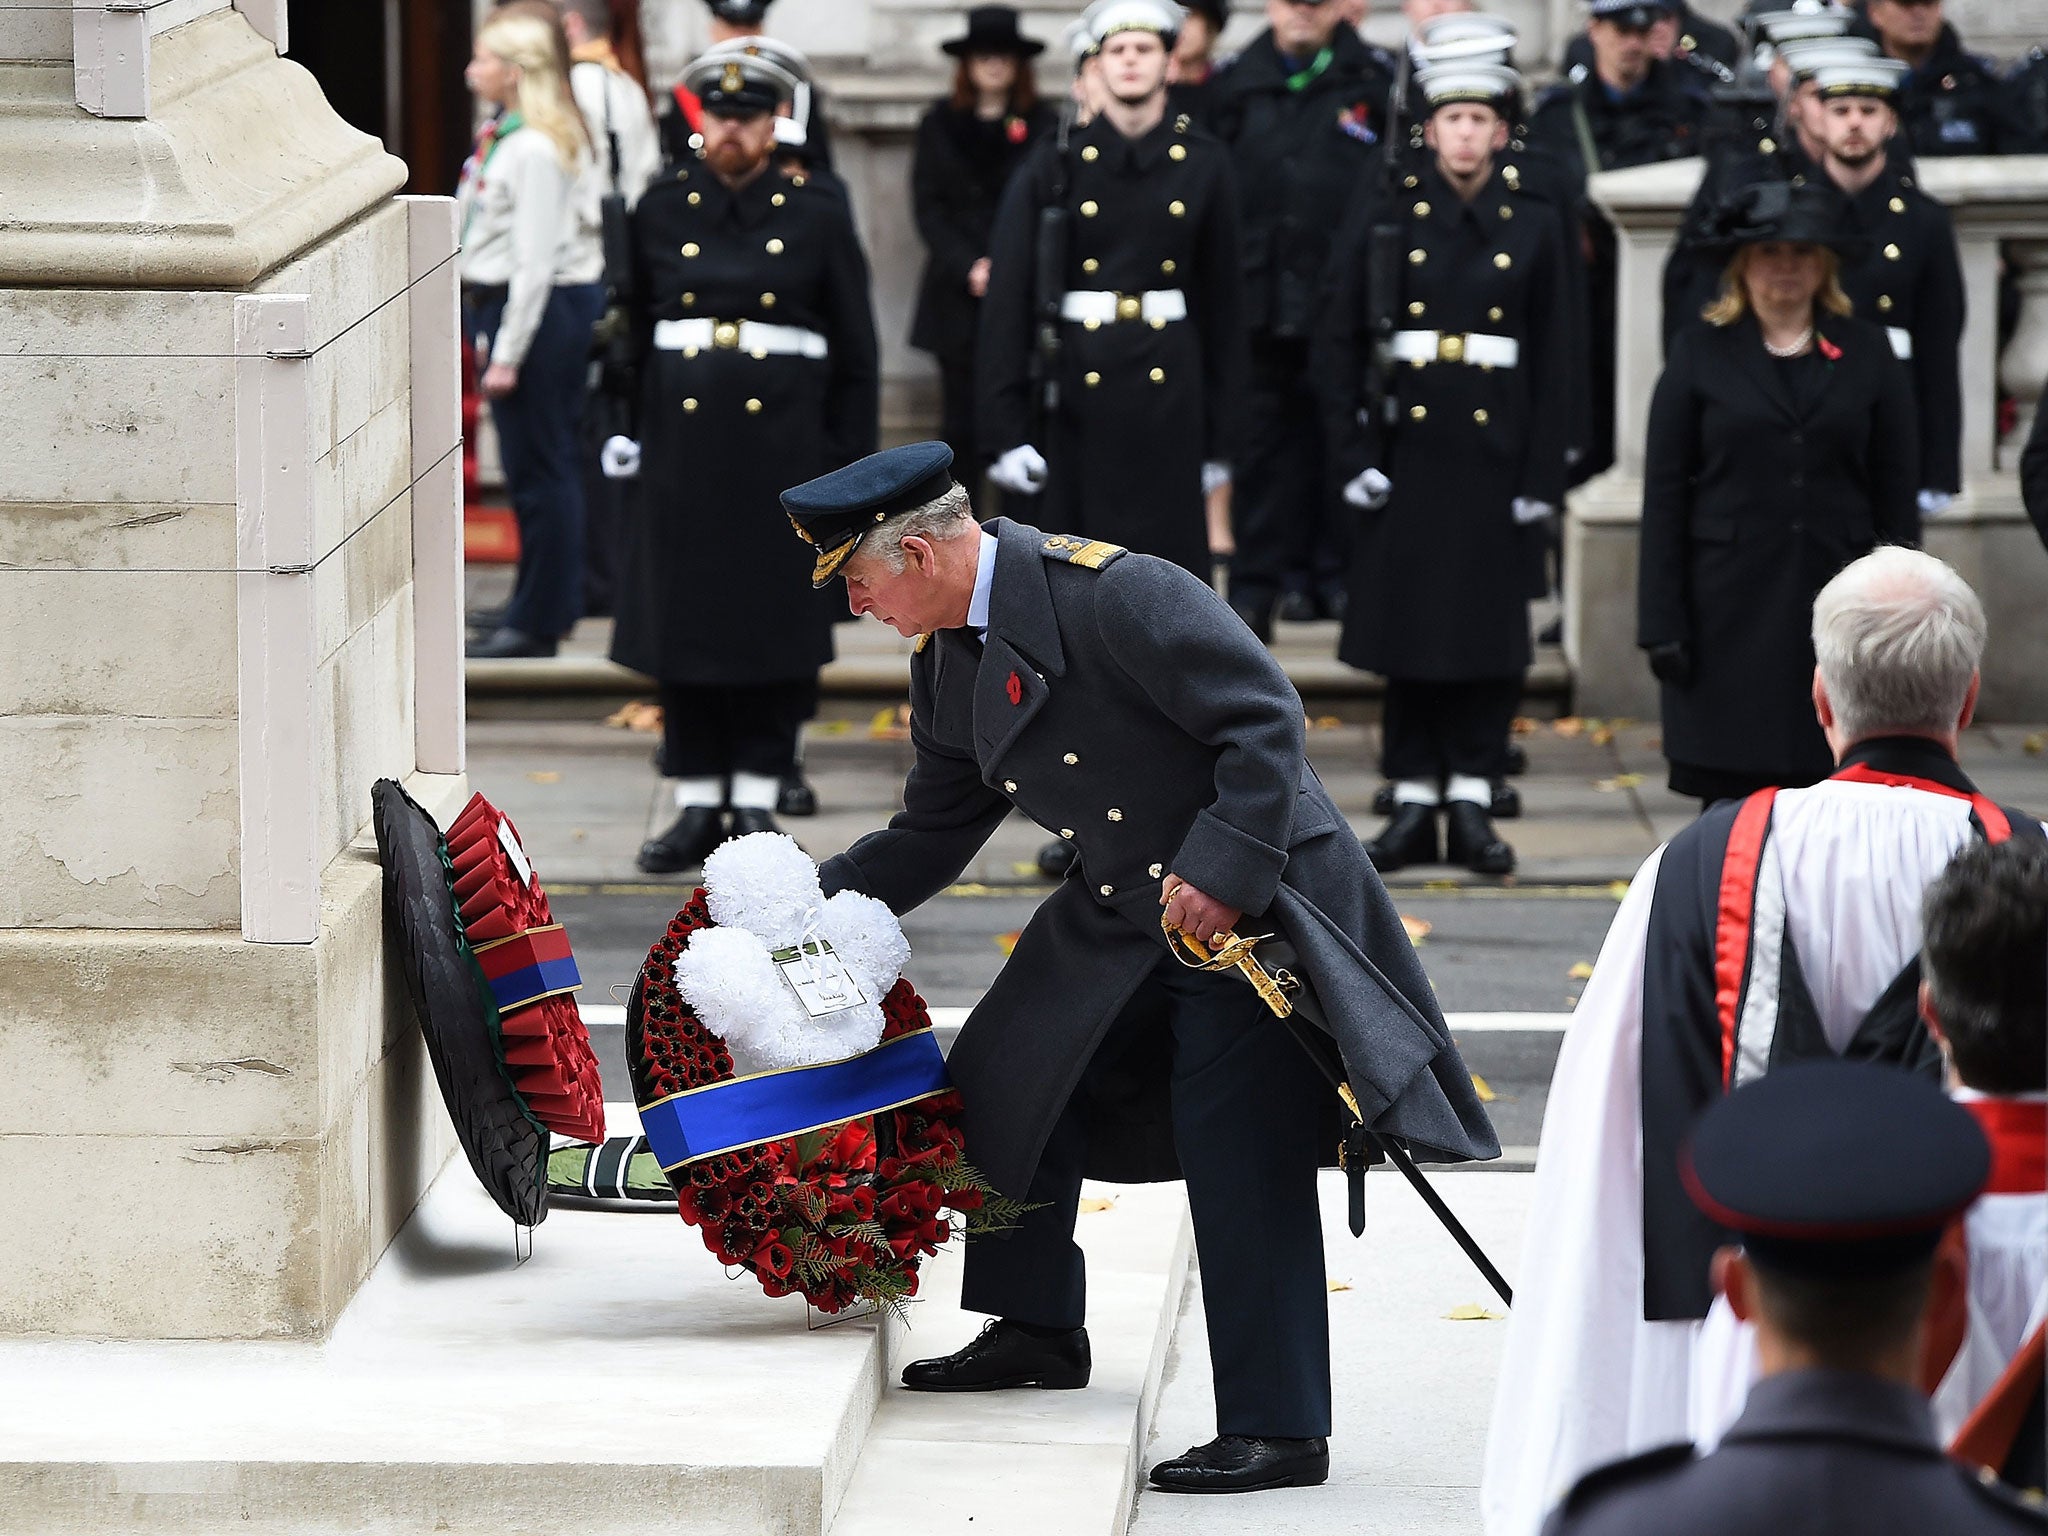 The Prince of Wales lays a wreath at the Cenotaph during Remembrance Sunday